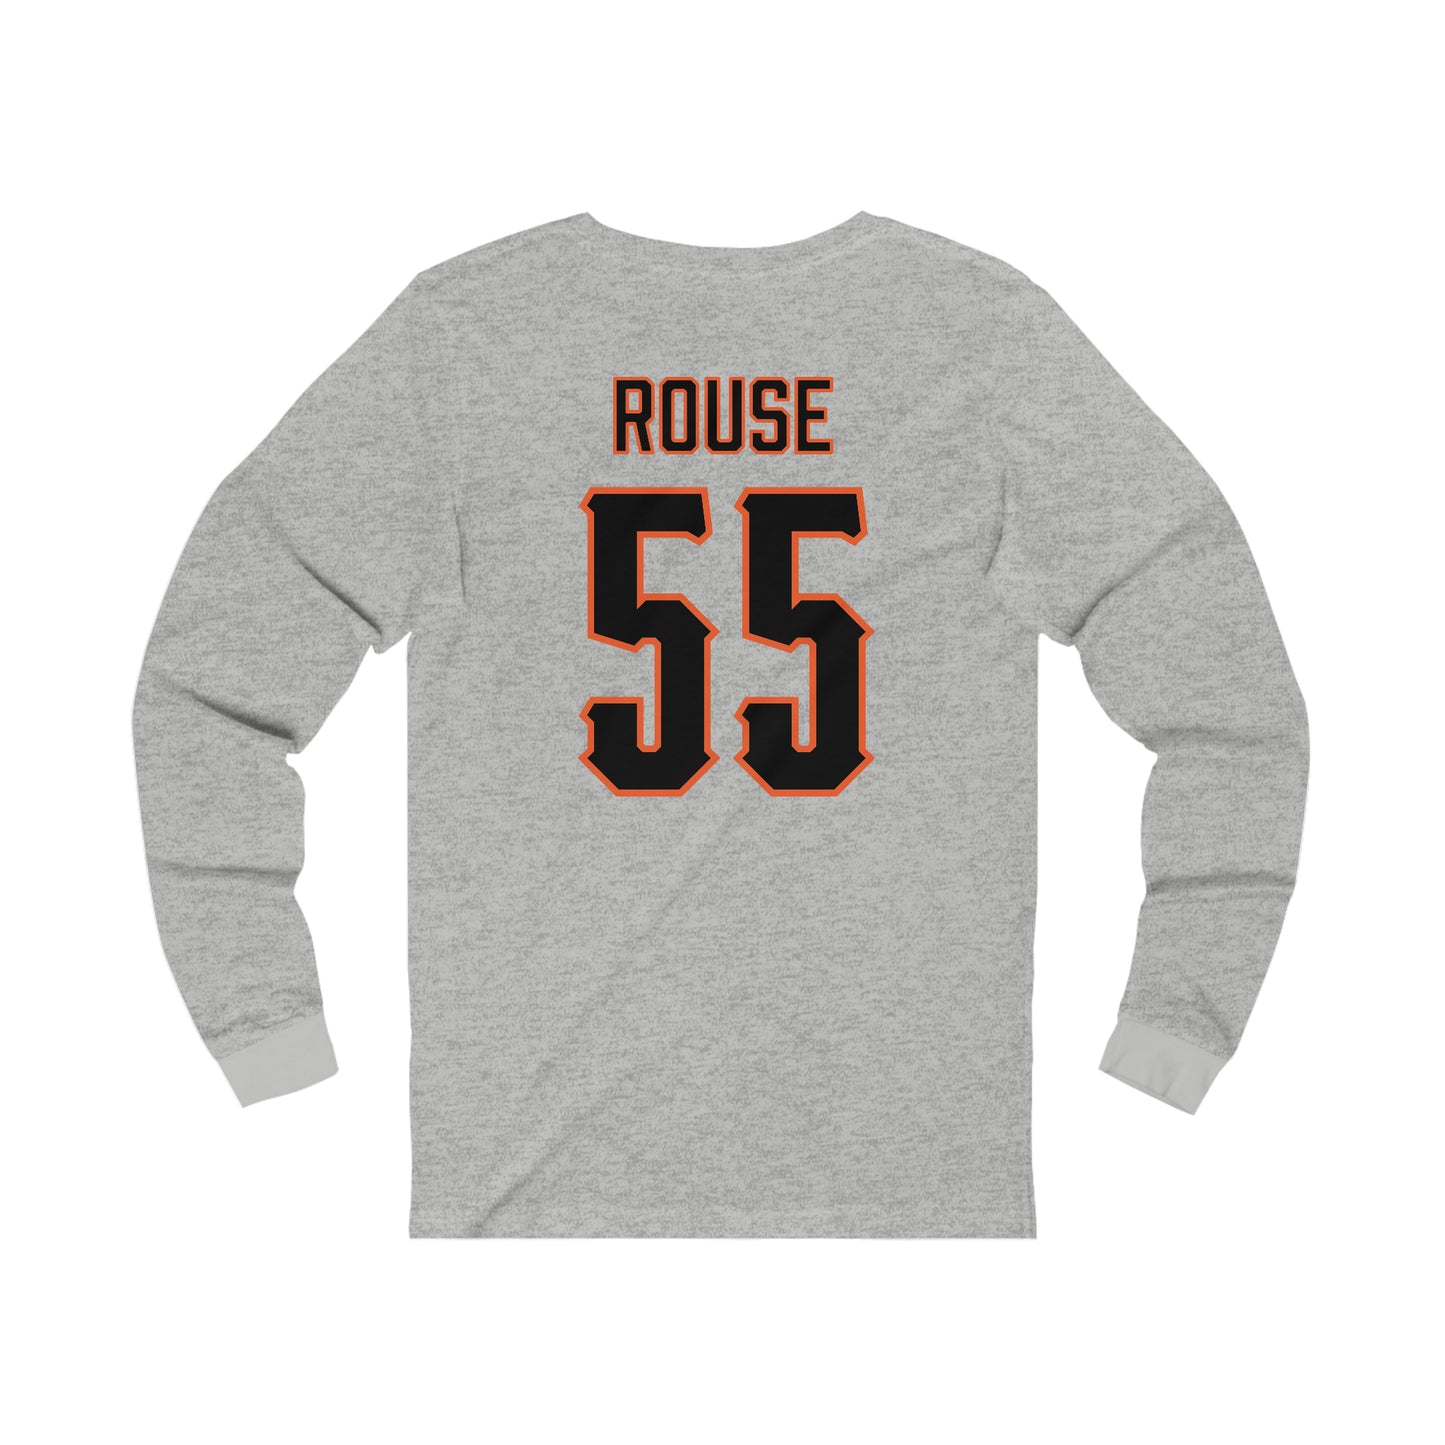 Weston Rouse #55 Pitching Pete Long Sleeve